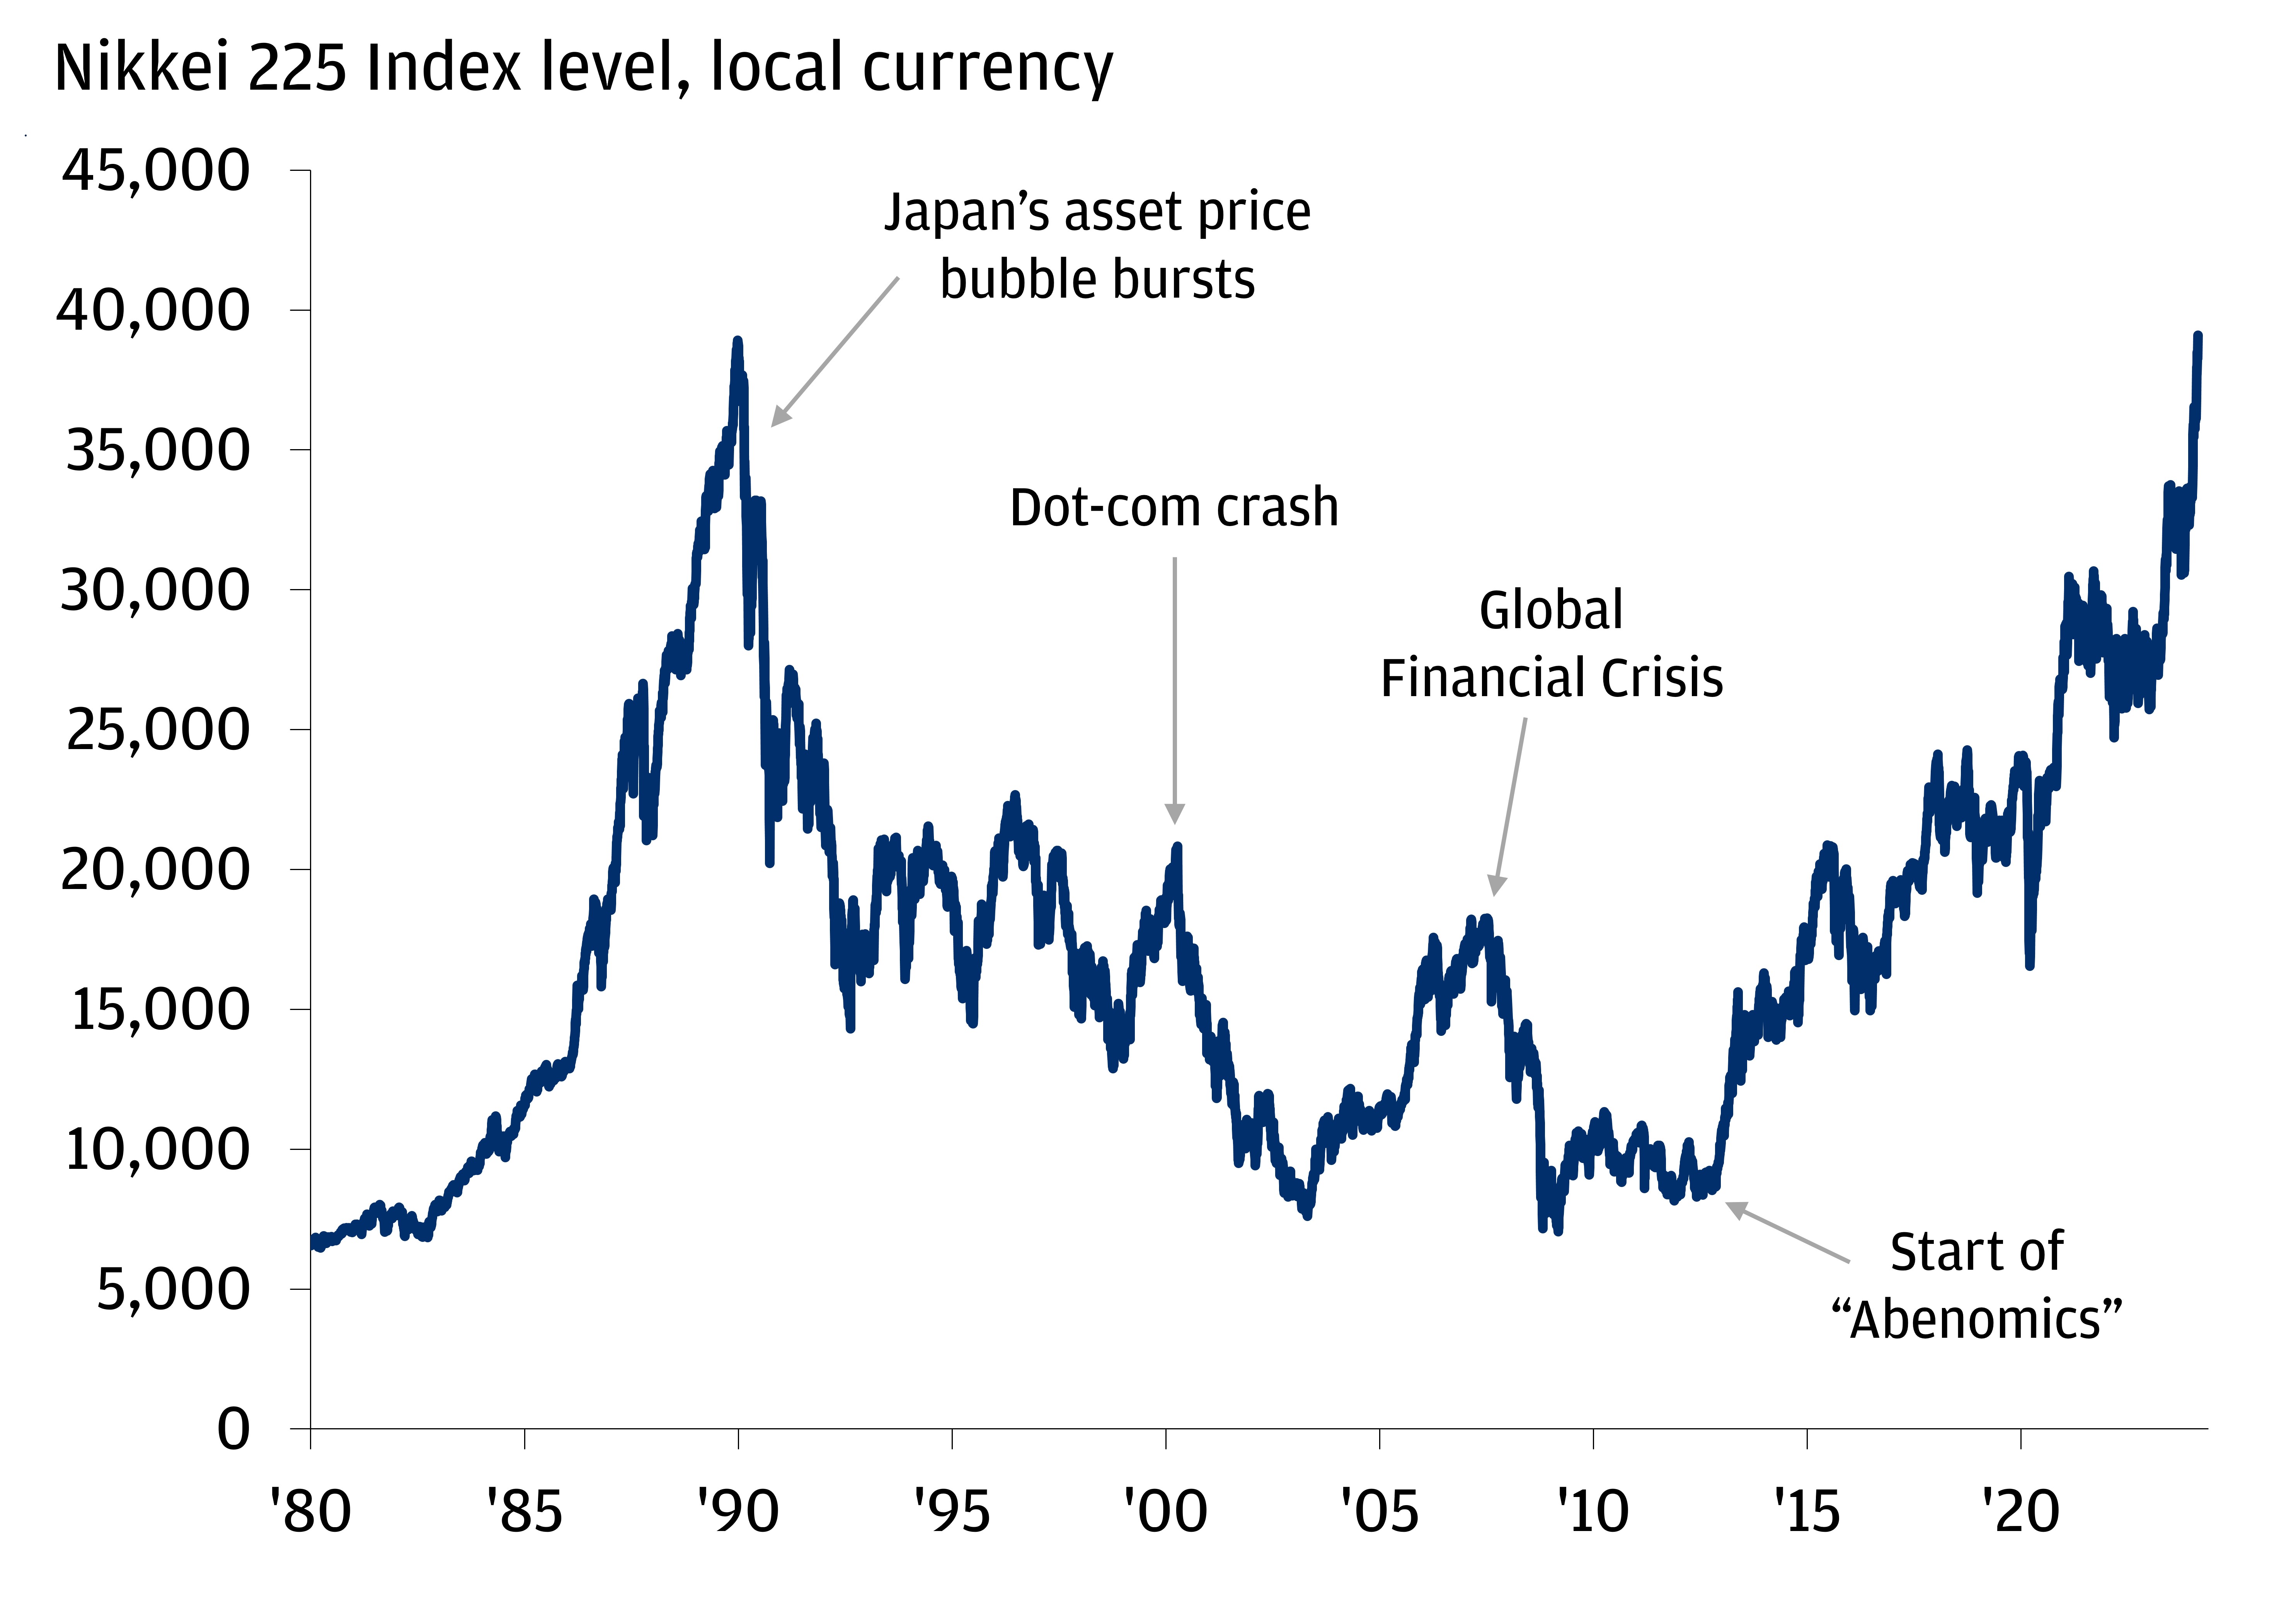 The chart describes the Nikkei 225 index level from 1980 to now. 